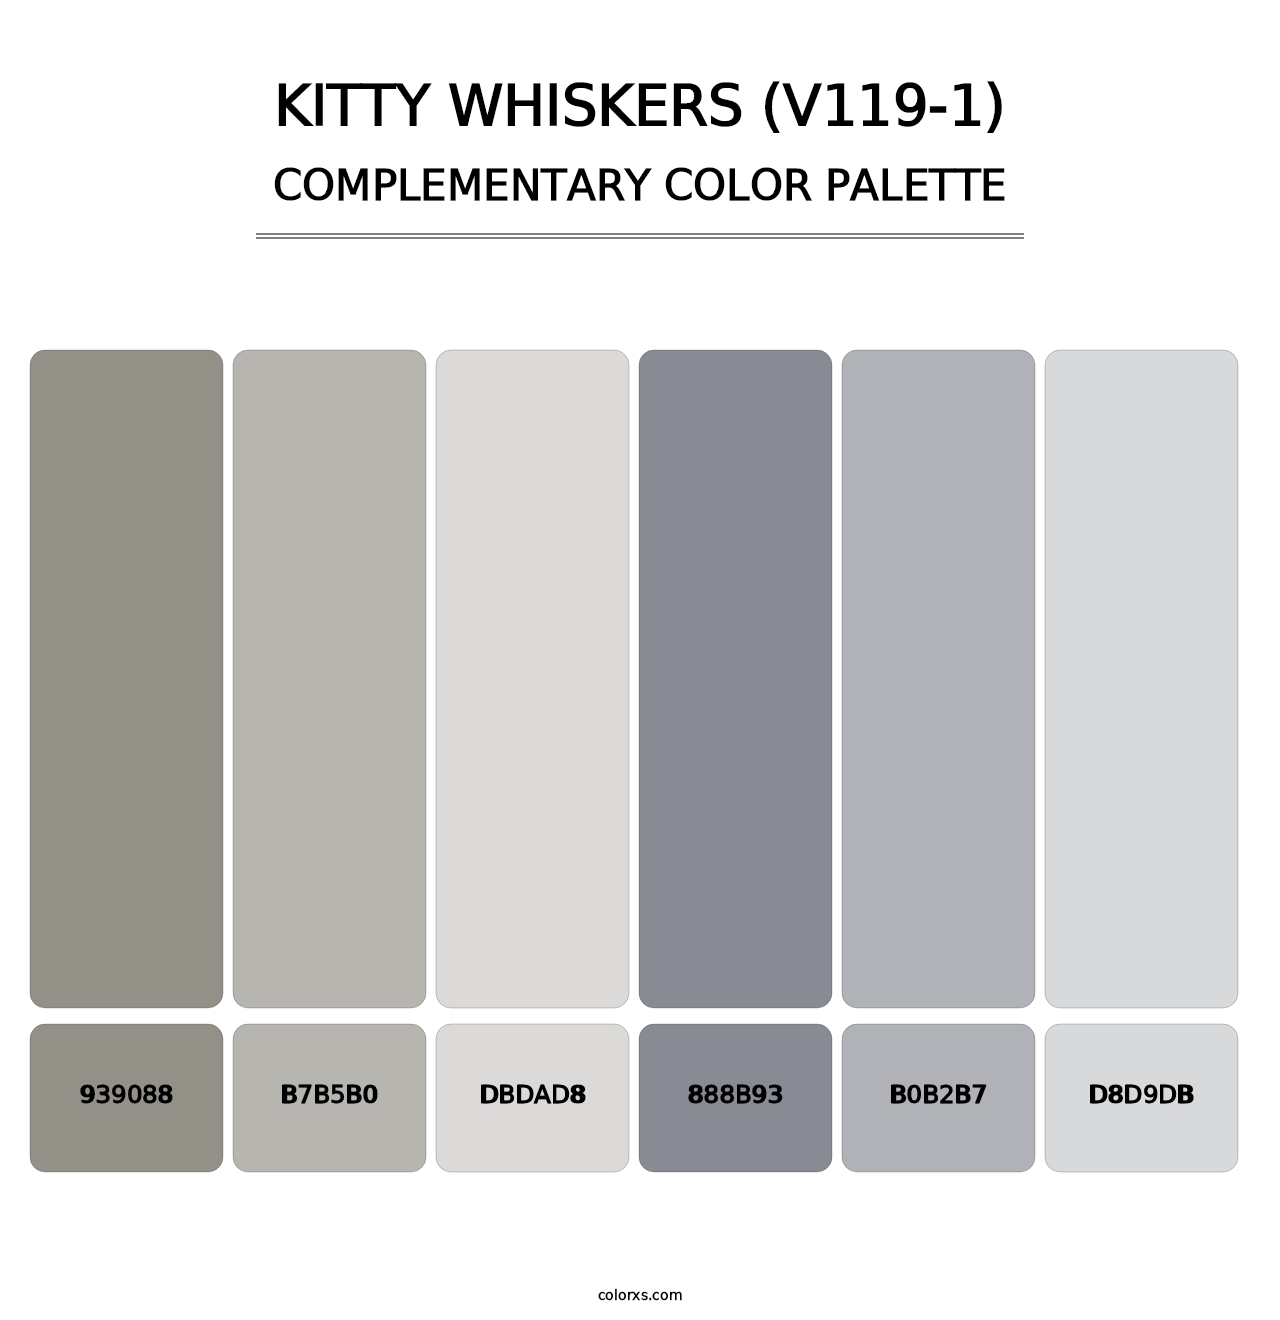 Kitty Whiskers (V119-1) - Complementary Color Palette